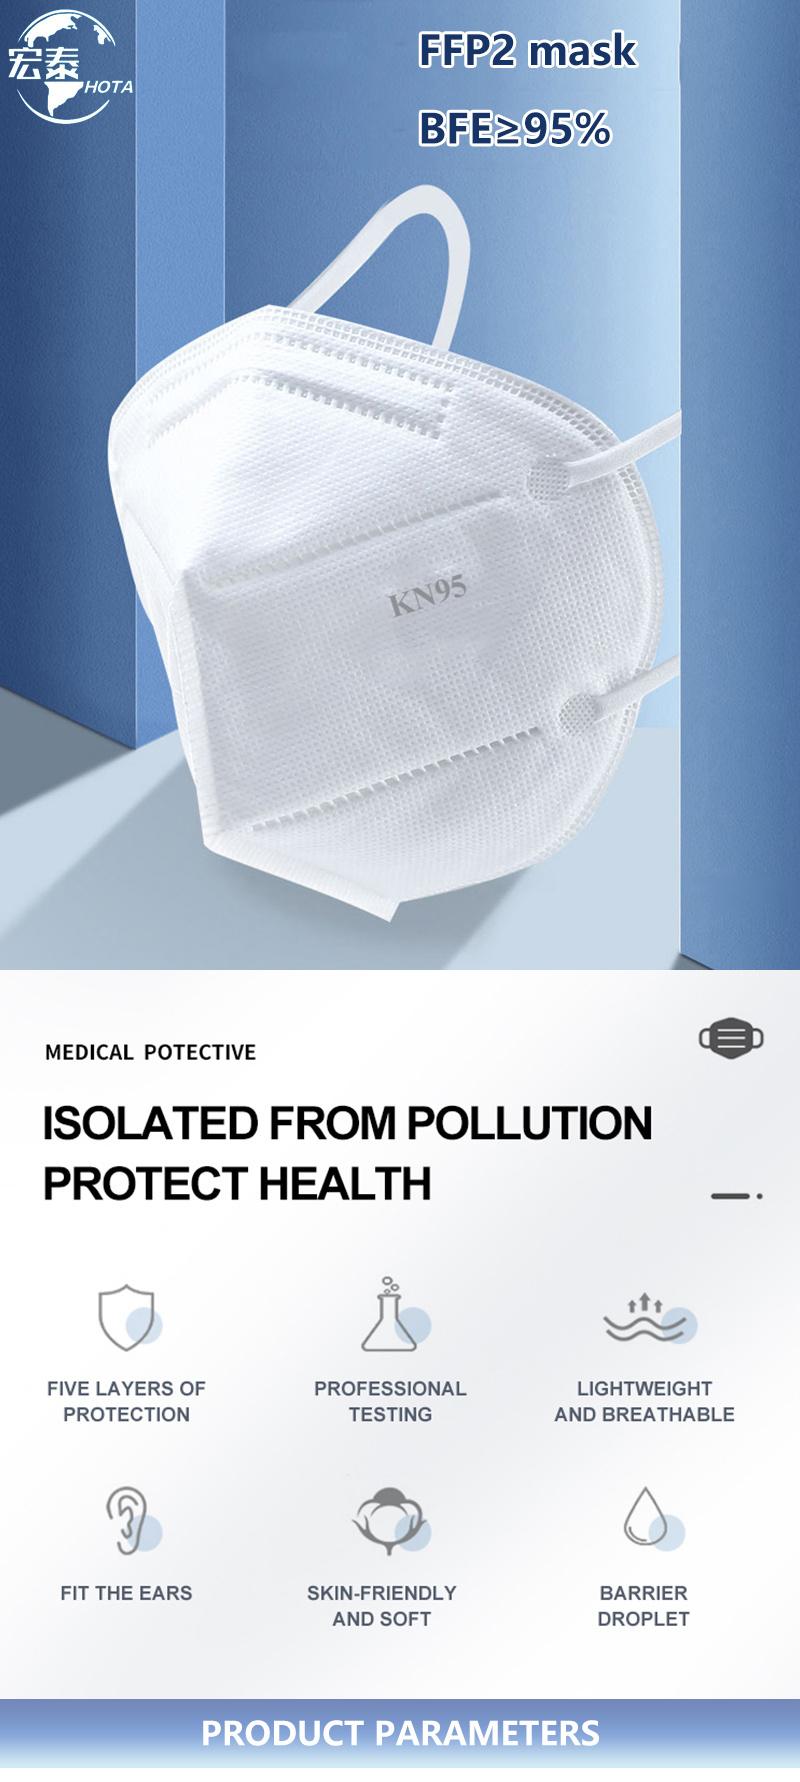 Healthcare Offers Certified FFP2, KN95 and Disposable Masks at Great Prices & Quantities to Healthcare, Businesses, Industry, and Institutions.